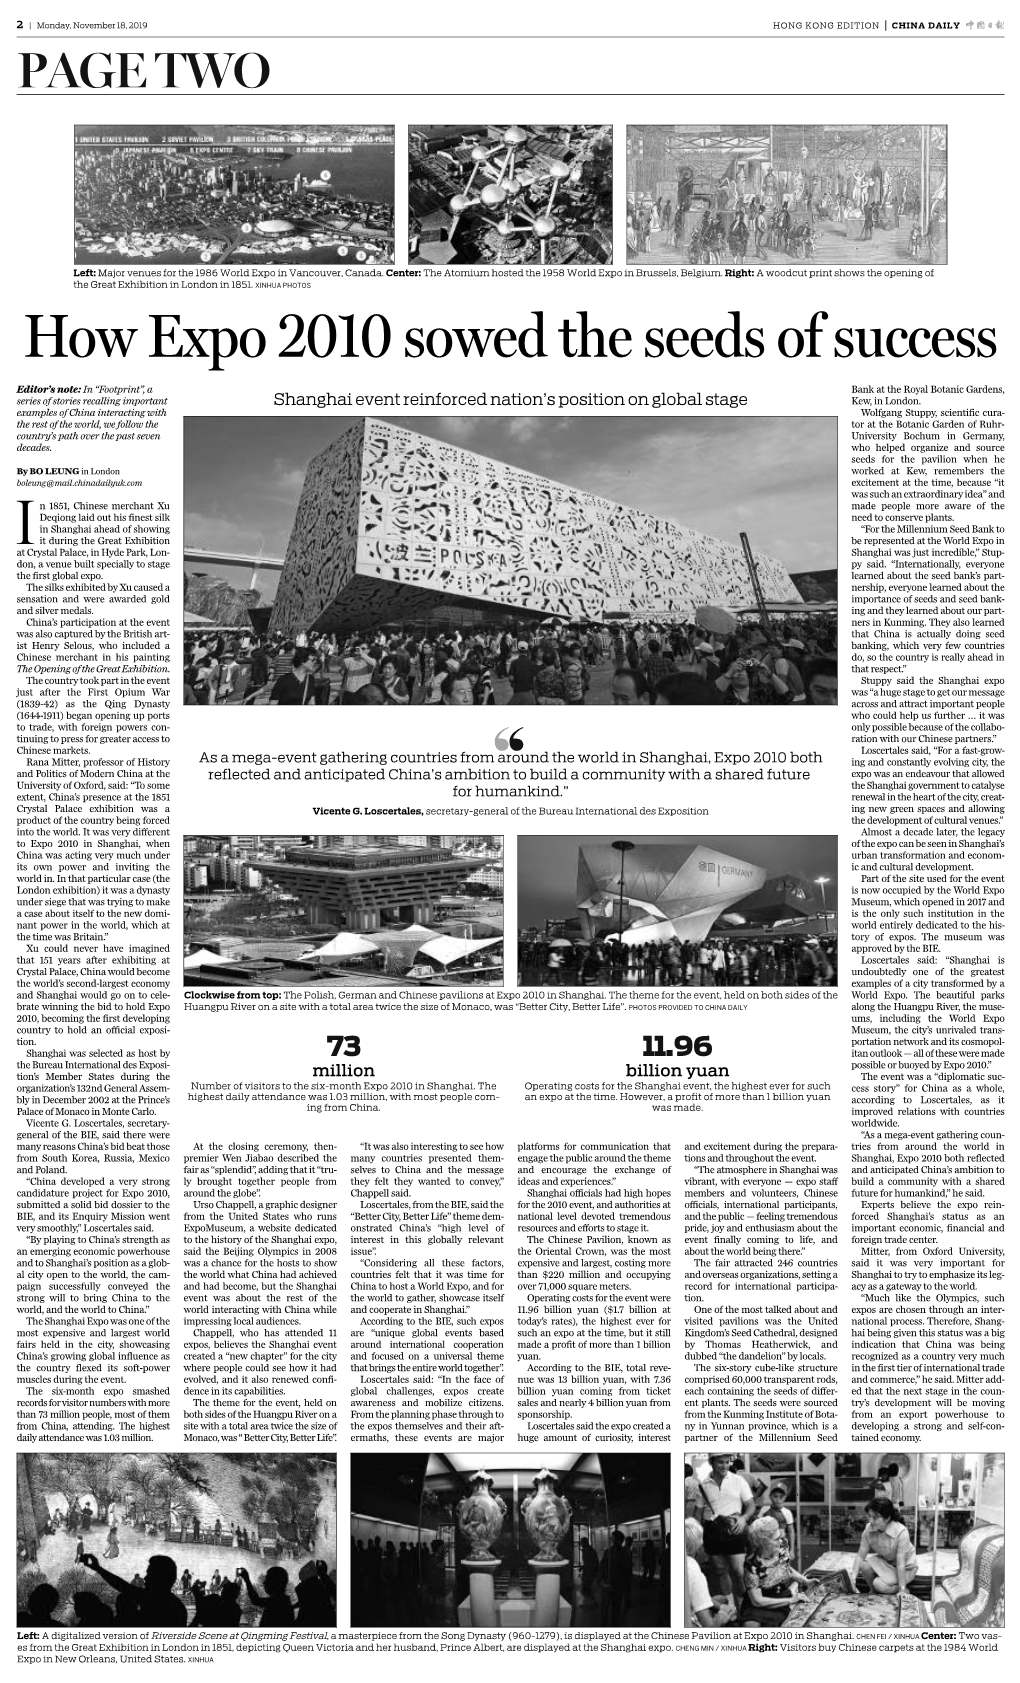 How Expo 2010 Sowed the Seeds of Success